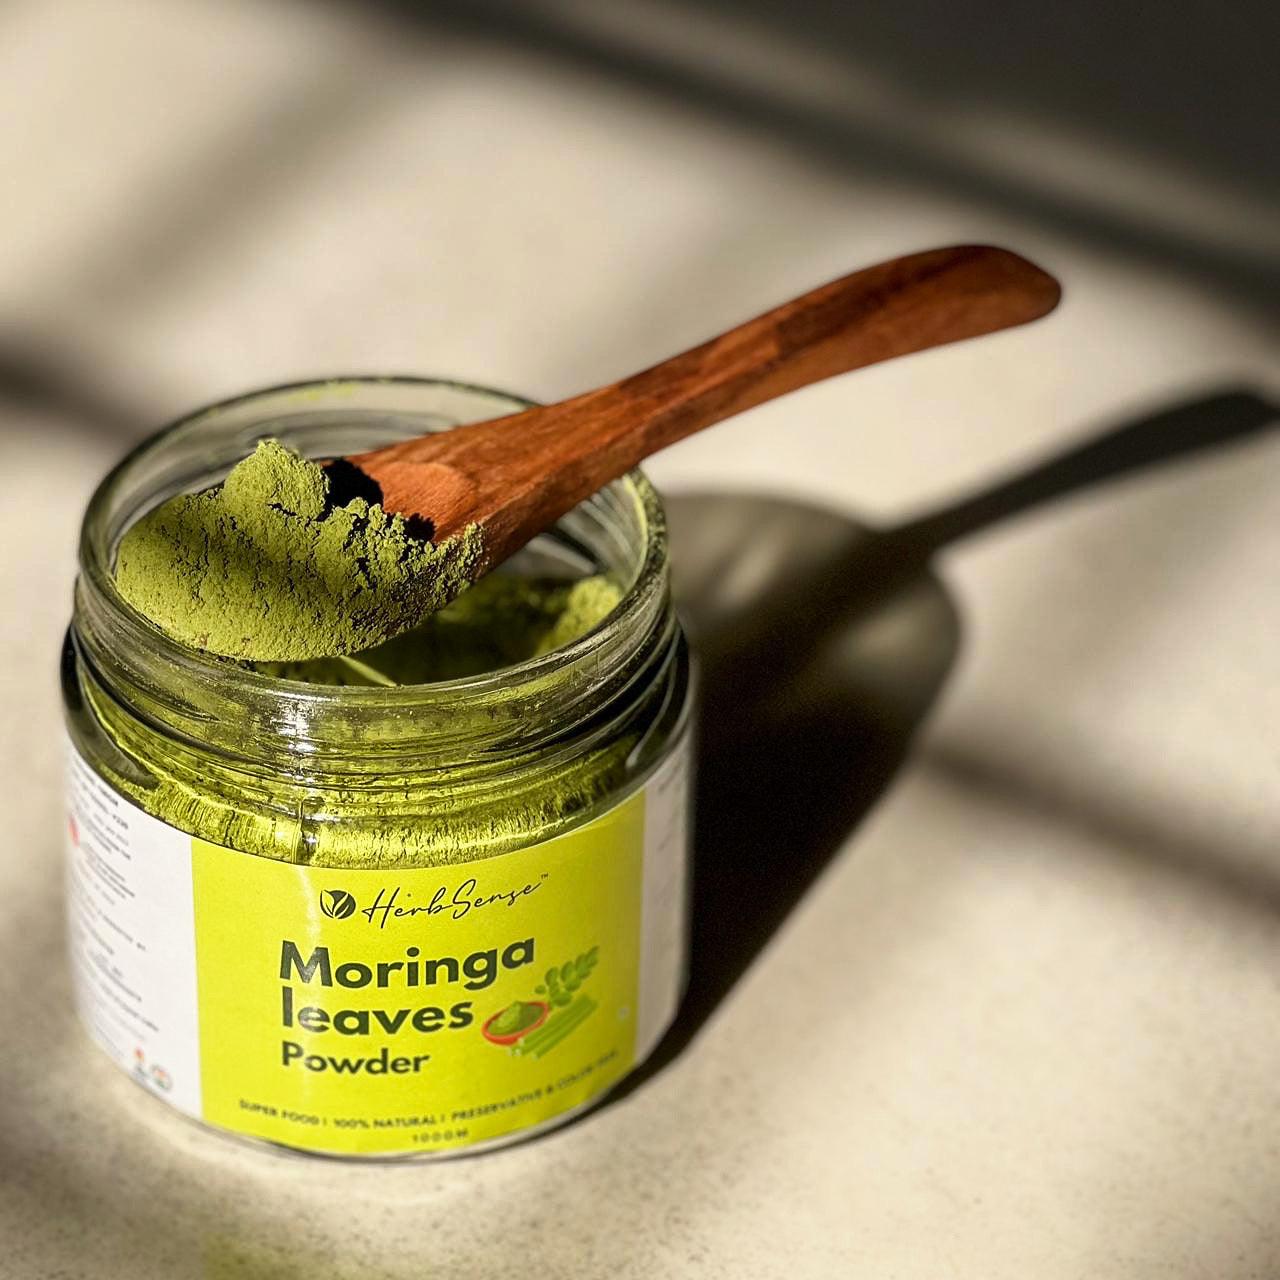 Moringa Leaves Powder-100gm- For Healthy Body & Skin, Superfood Packed with Antioxidants & Vitamins - Herbsense